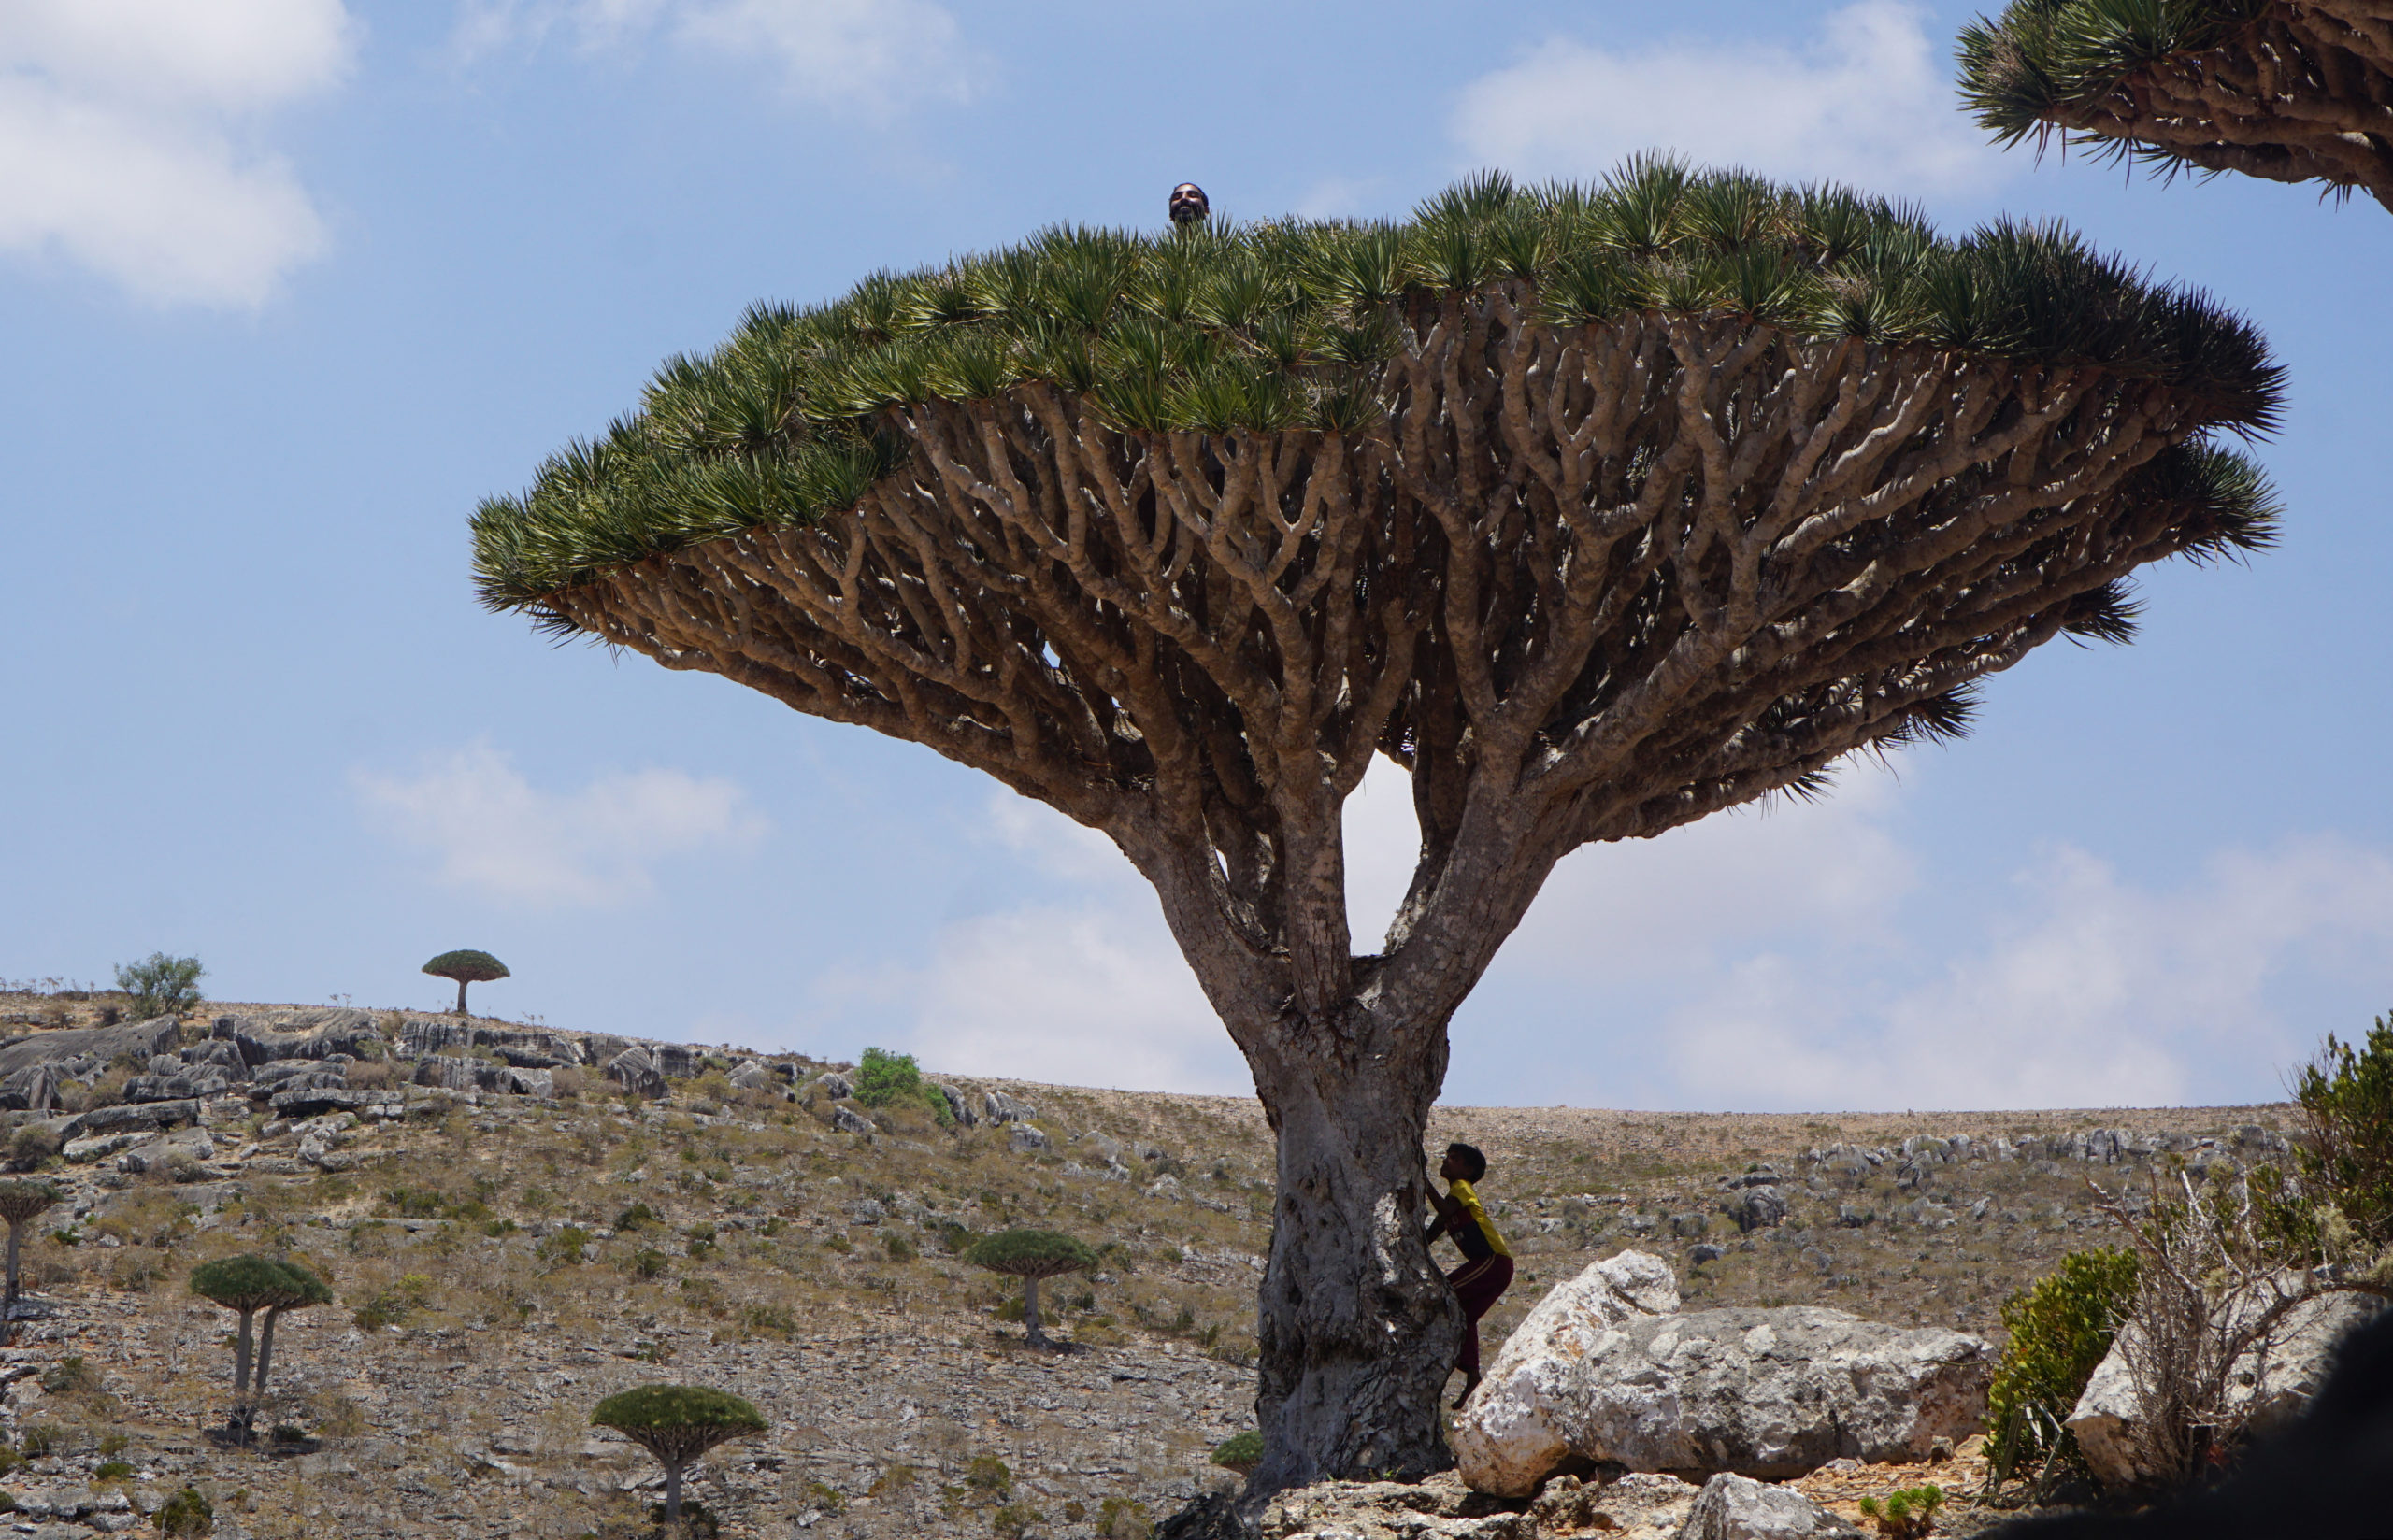 This photo shows a view of the strategic Yemeni island of Socotra